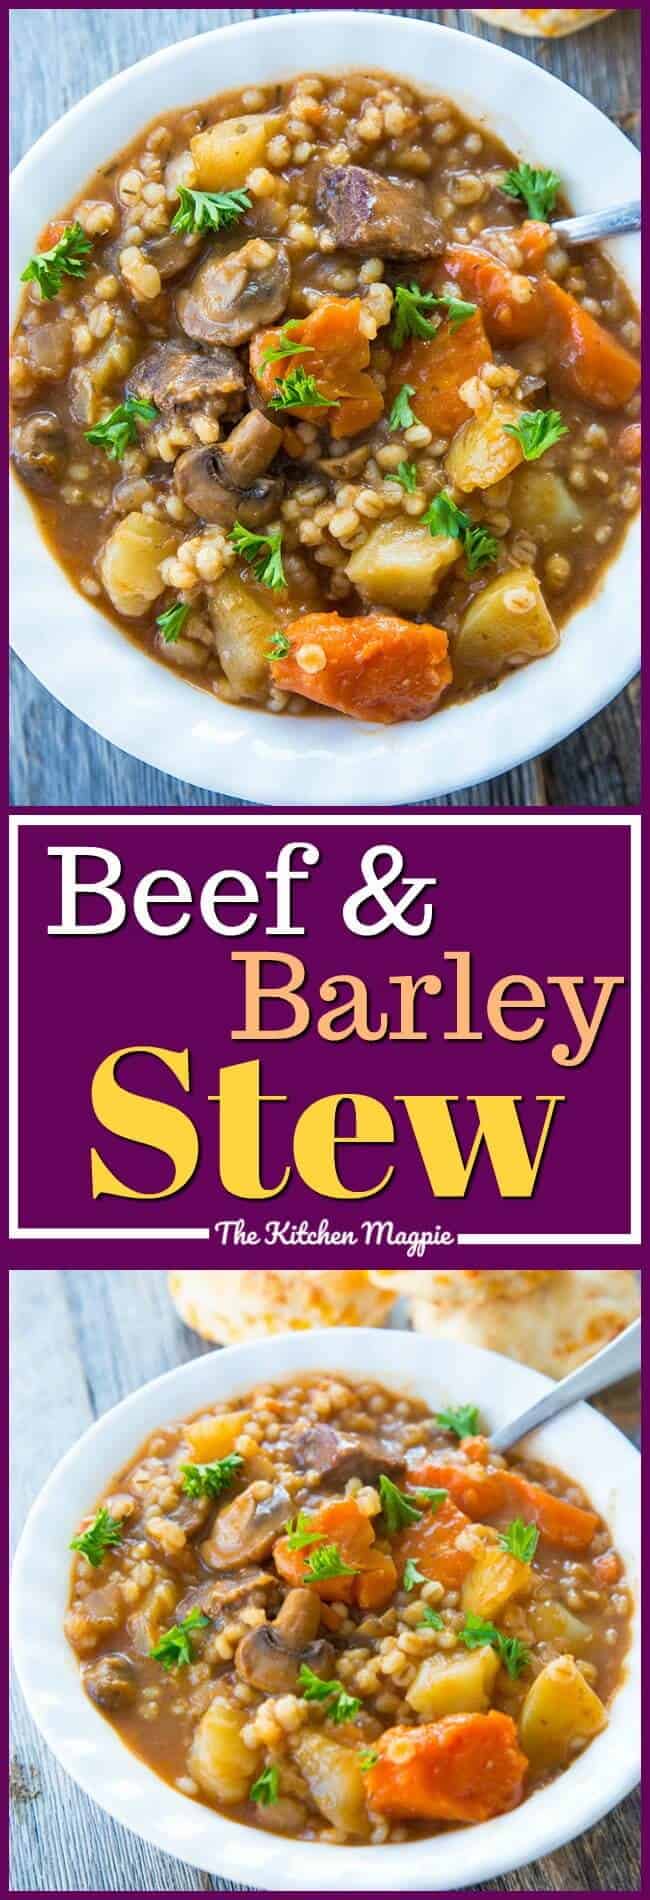 Hearty and delicious beef and barley stew, perfect for a comforting dinner at the end of the day. Make it in your Instant Pot or your slow cooker. #instantpot #slowcooker #stew #soups #recipes